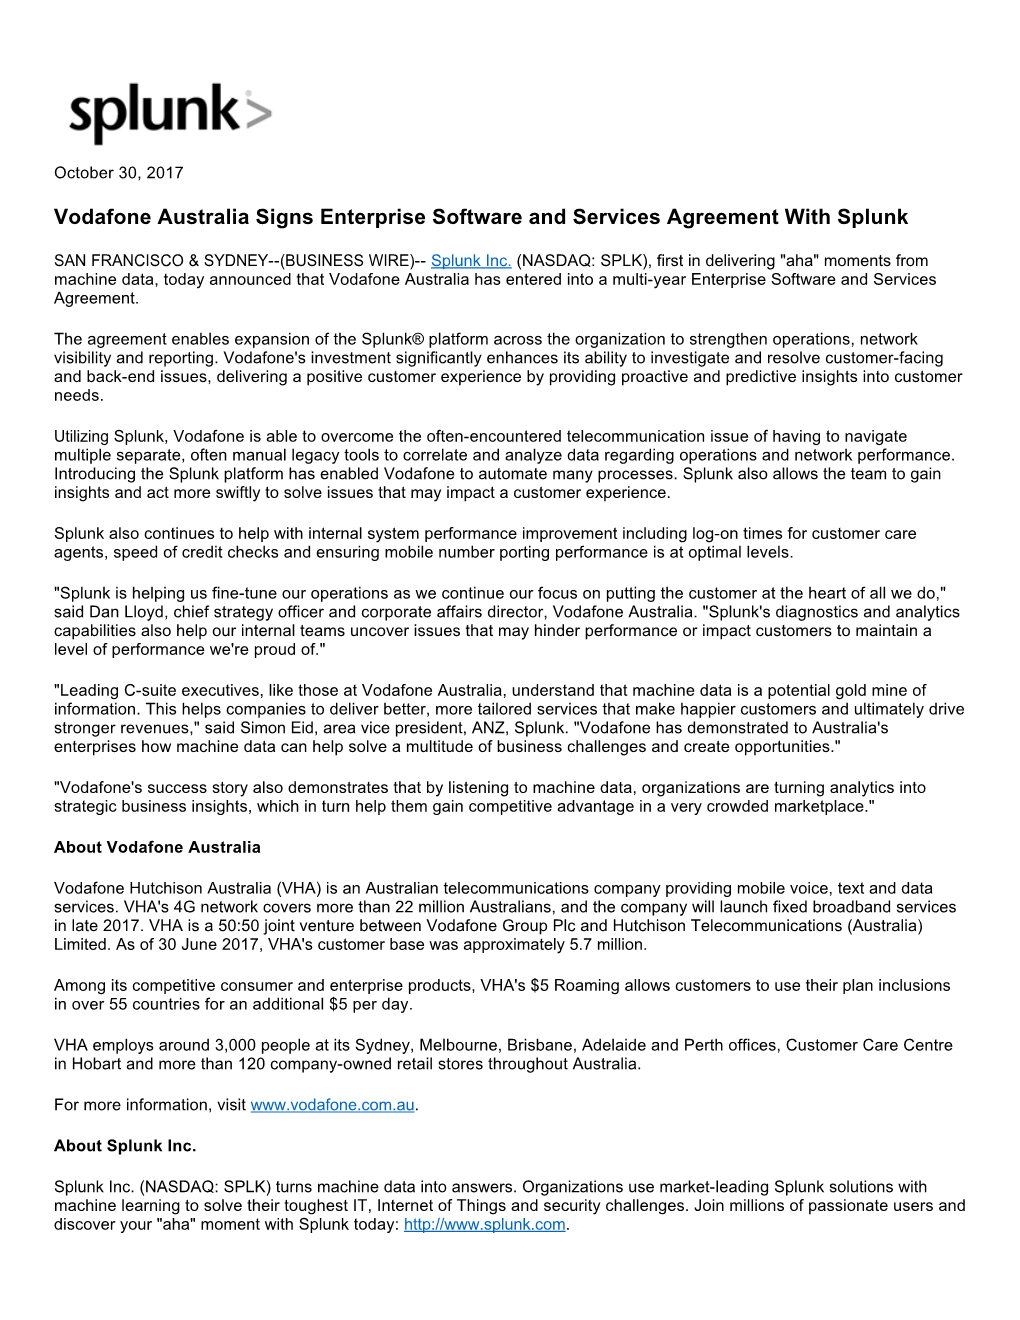 Vodafone Australia Signs Enterprise Software and Services Agreement with Splunk